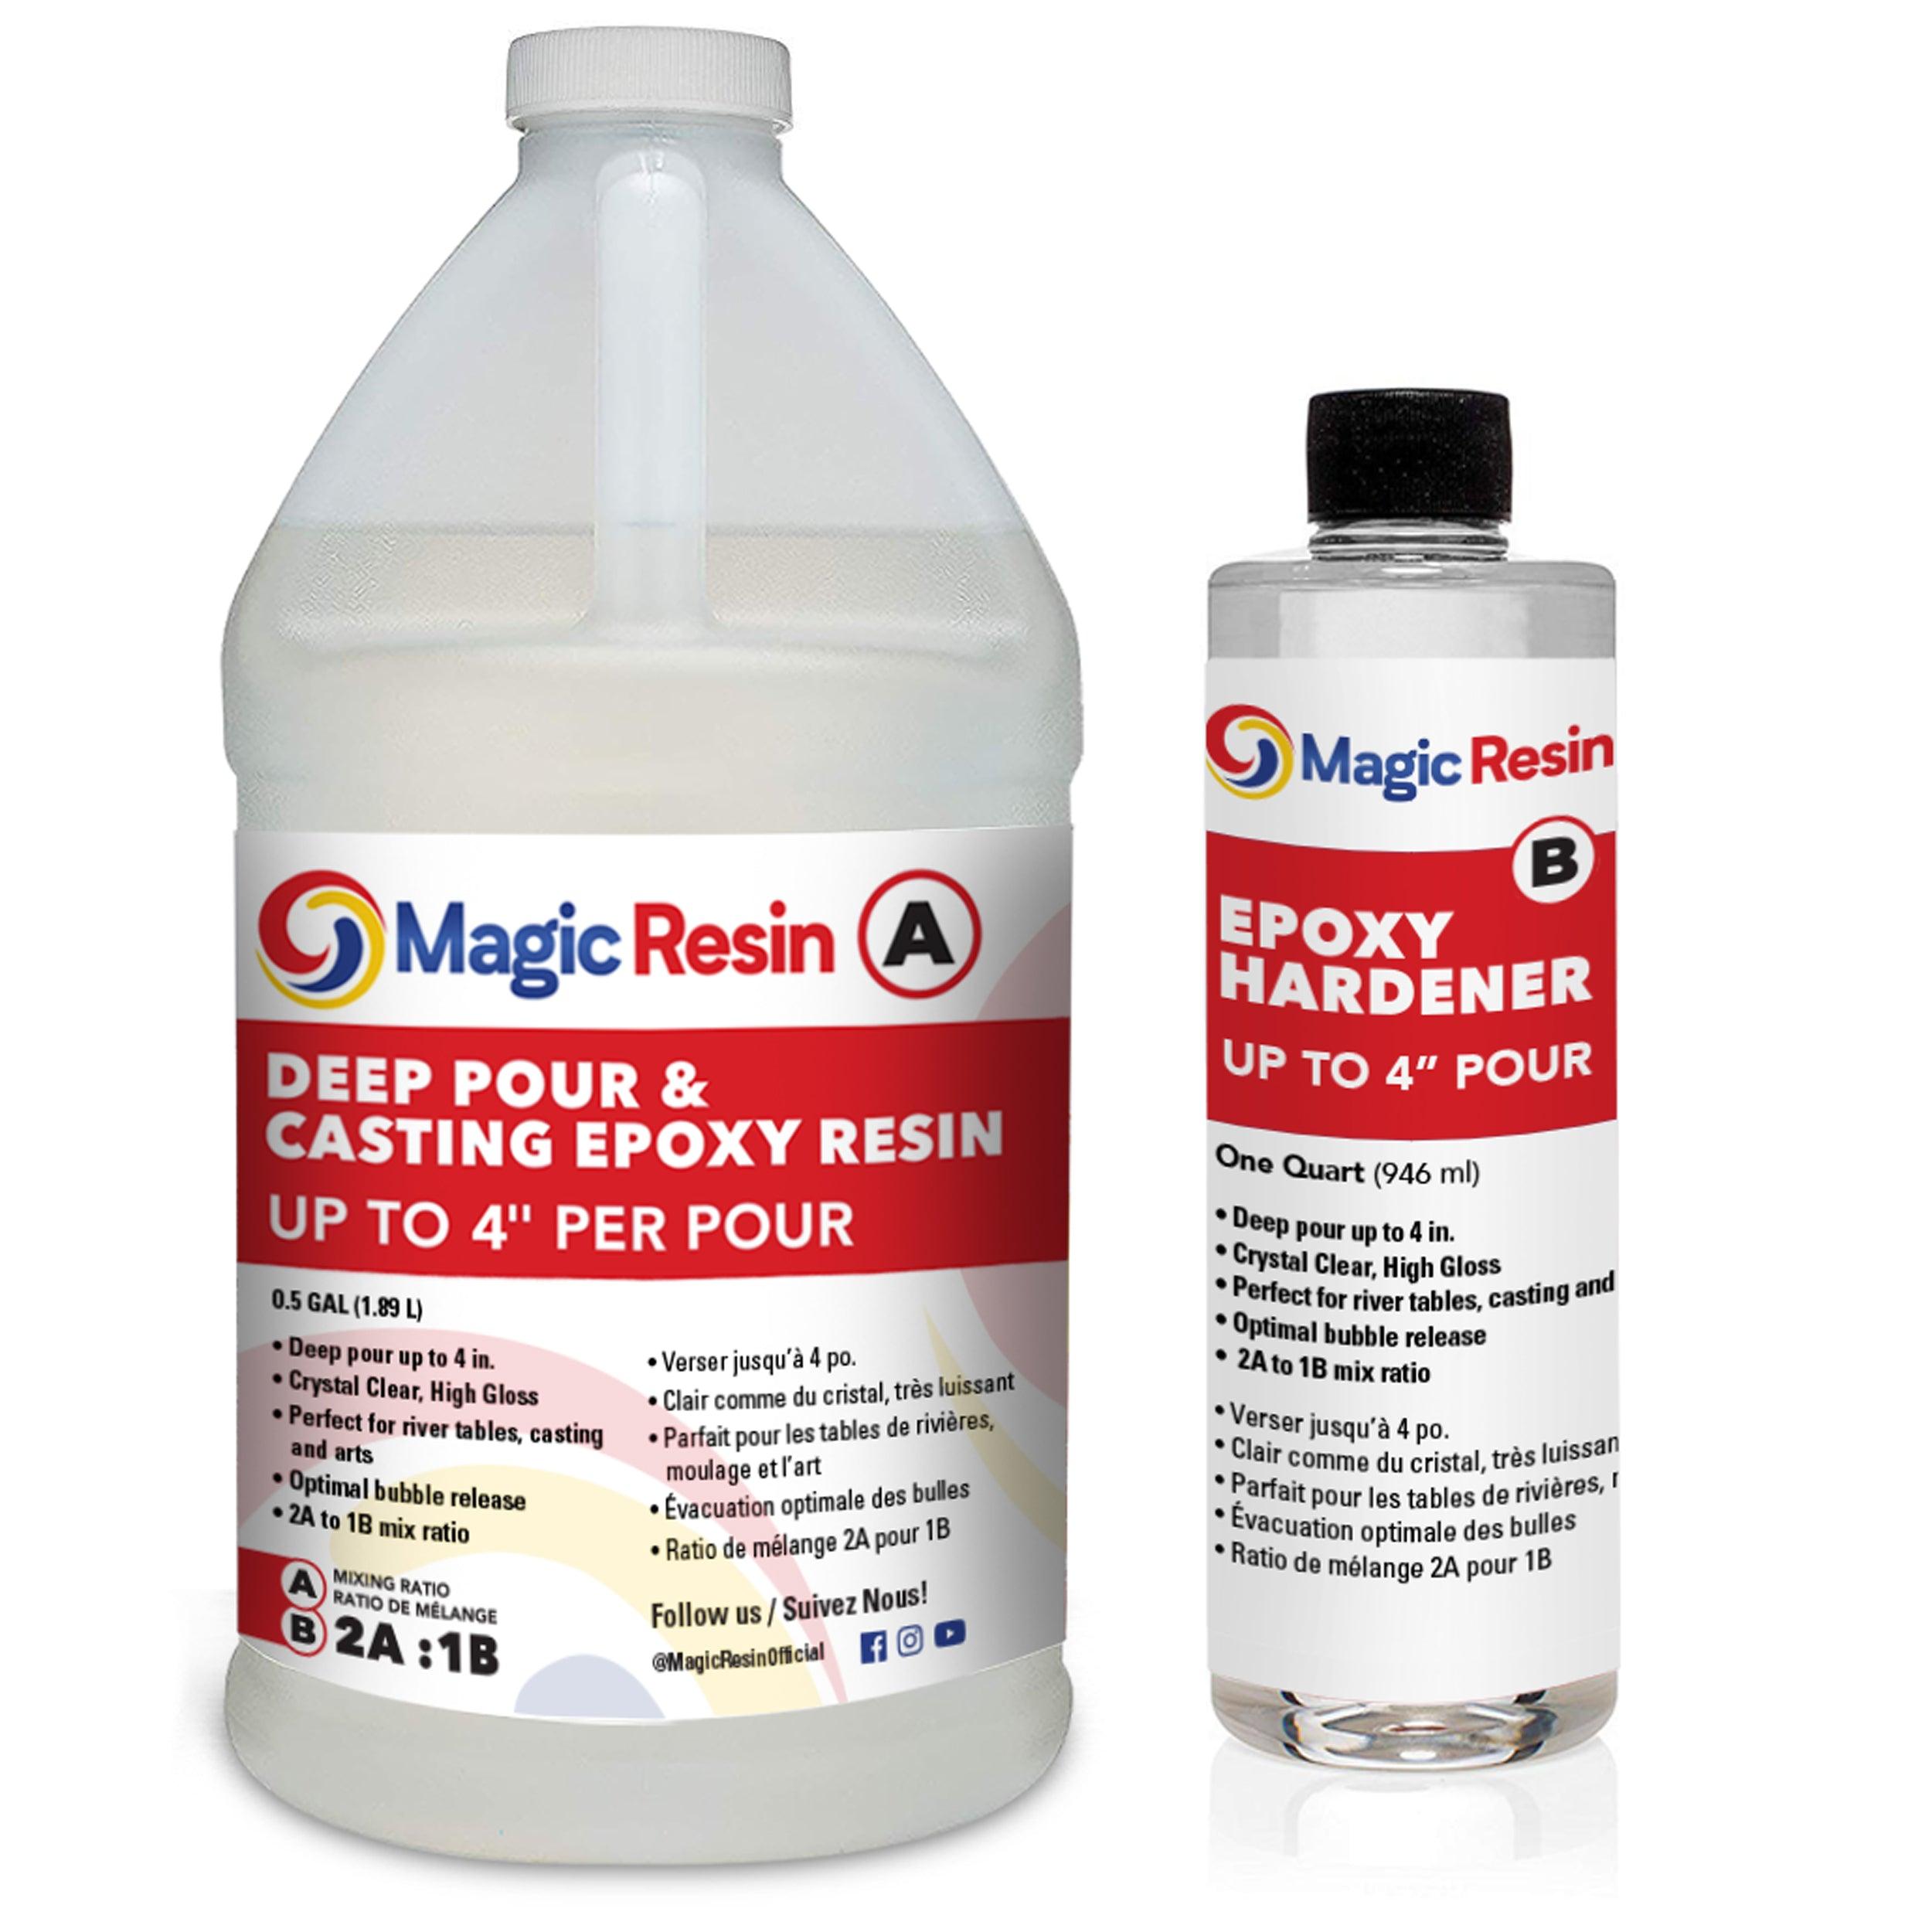 Crystal Clear Epoxy Resin 1 Gallon Kit | Great for Wood projects BarTops  River tables Tumblers Artist Quality| Two part Kit includes Resin and